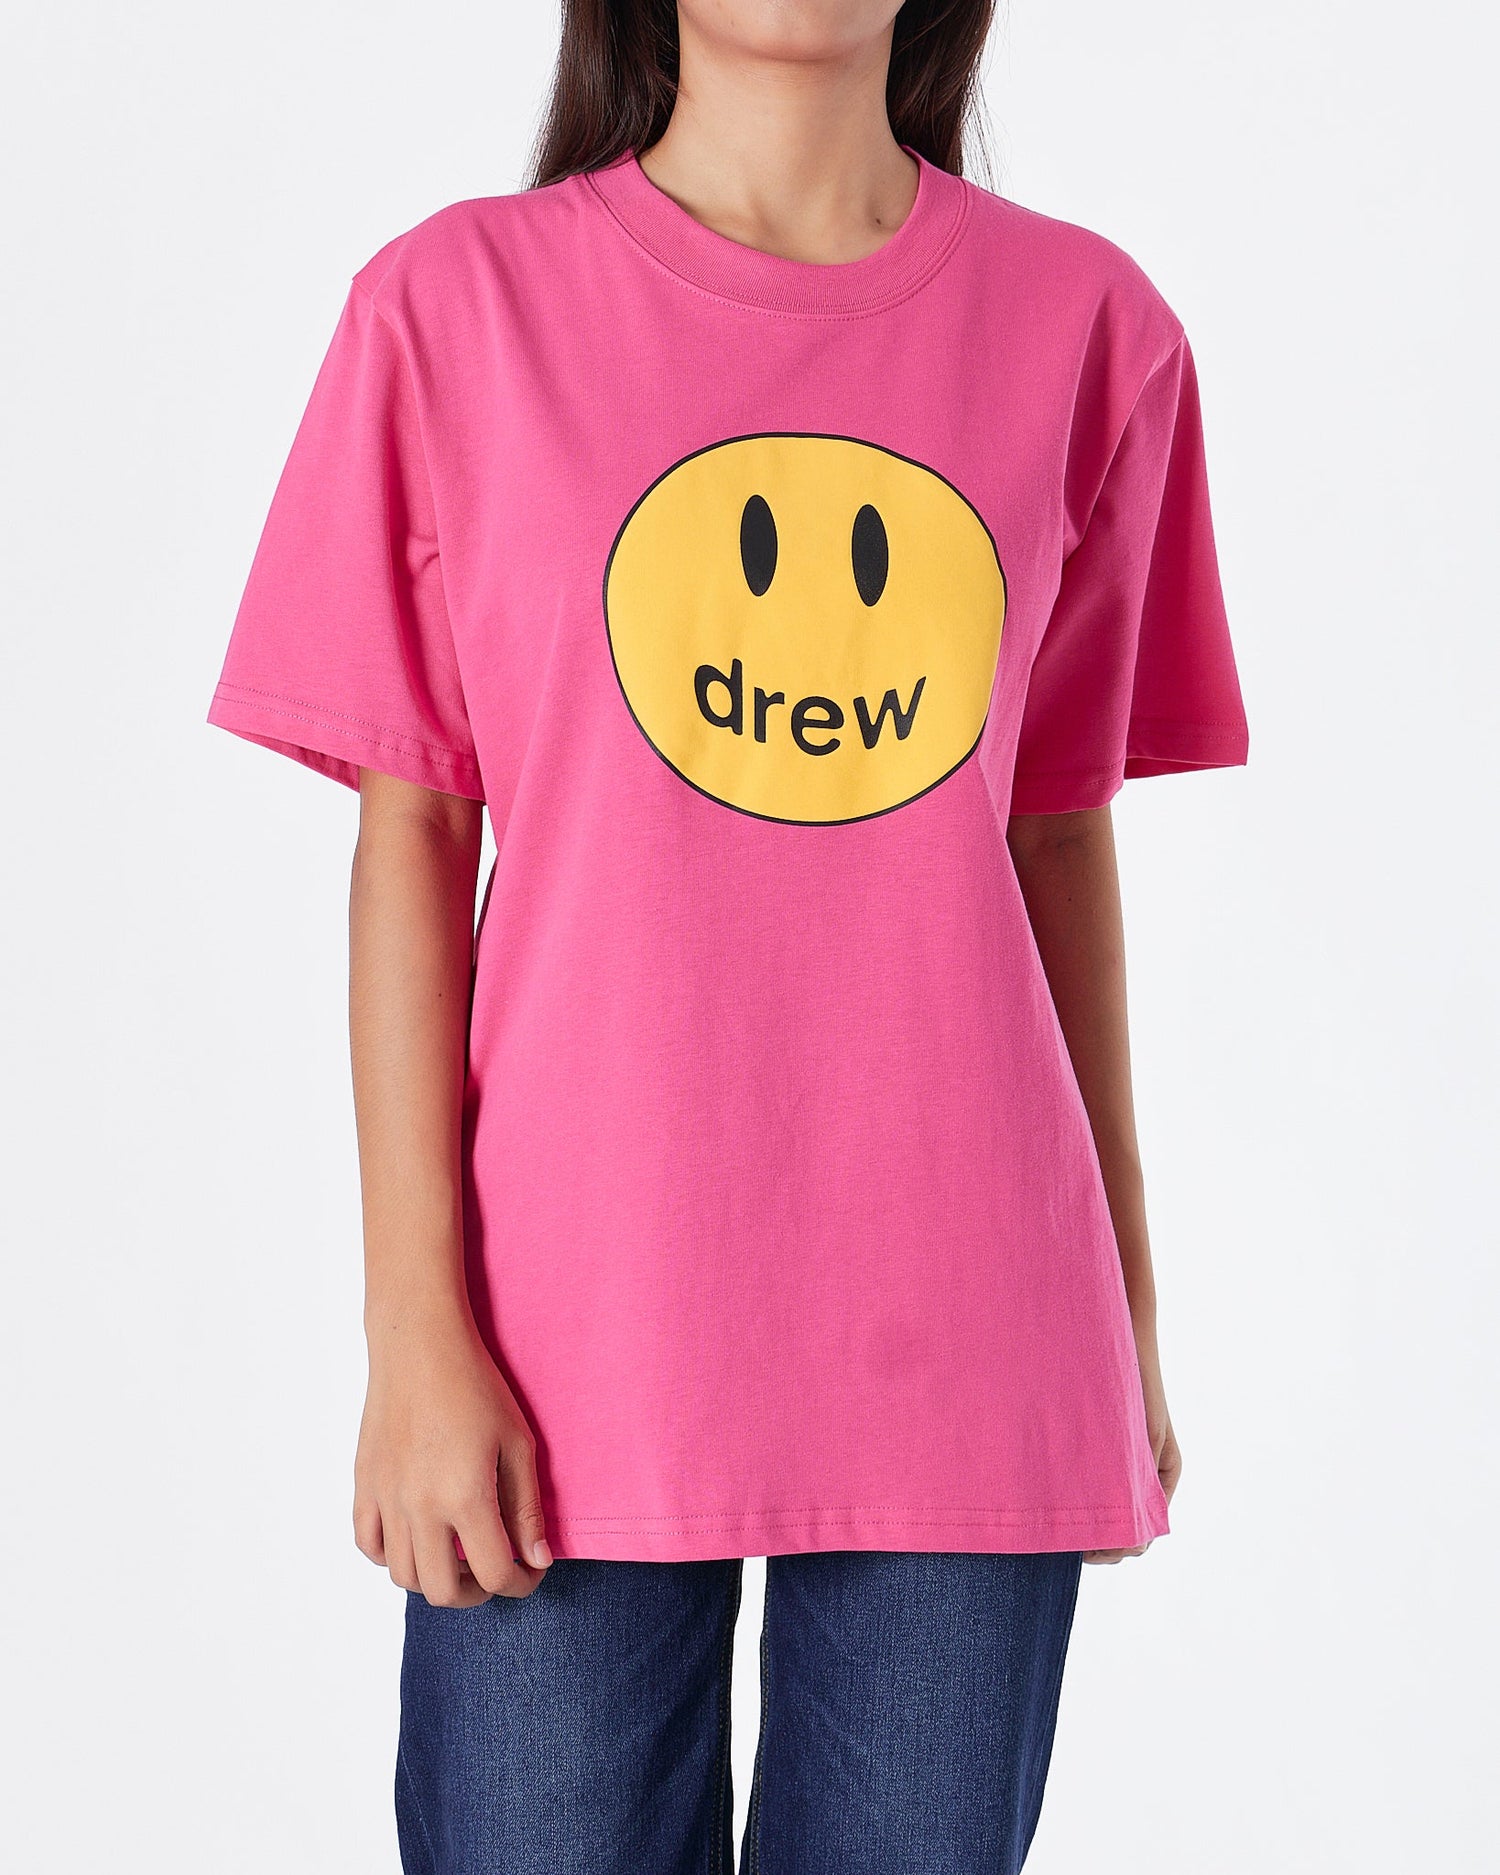 MOI OUTFIT-DRE Smiling Face Unisex Pink T-Shirt 18.90